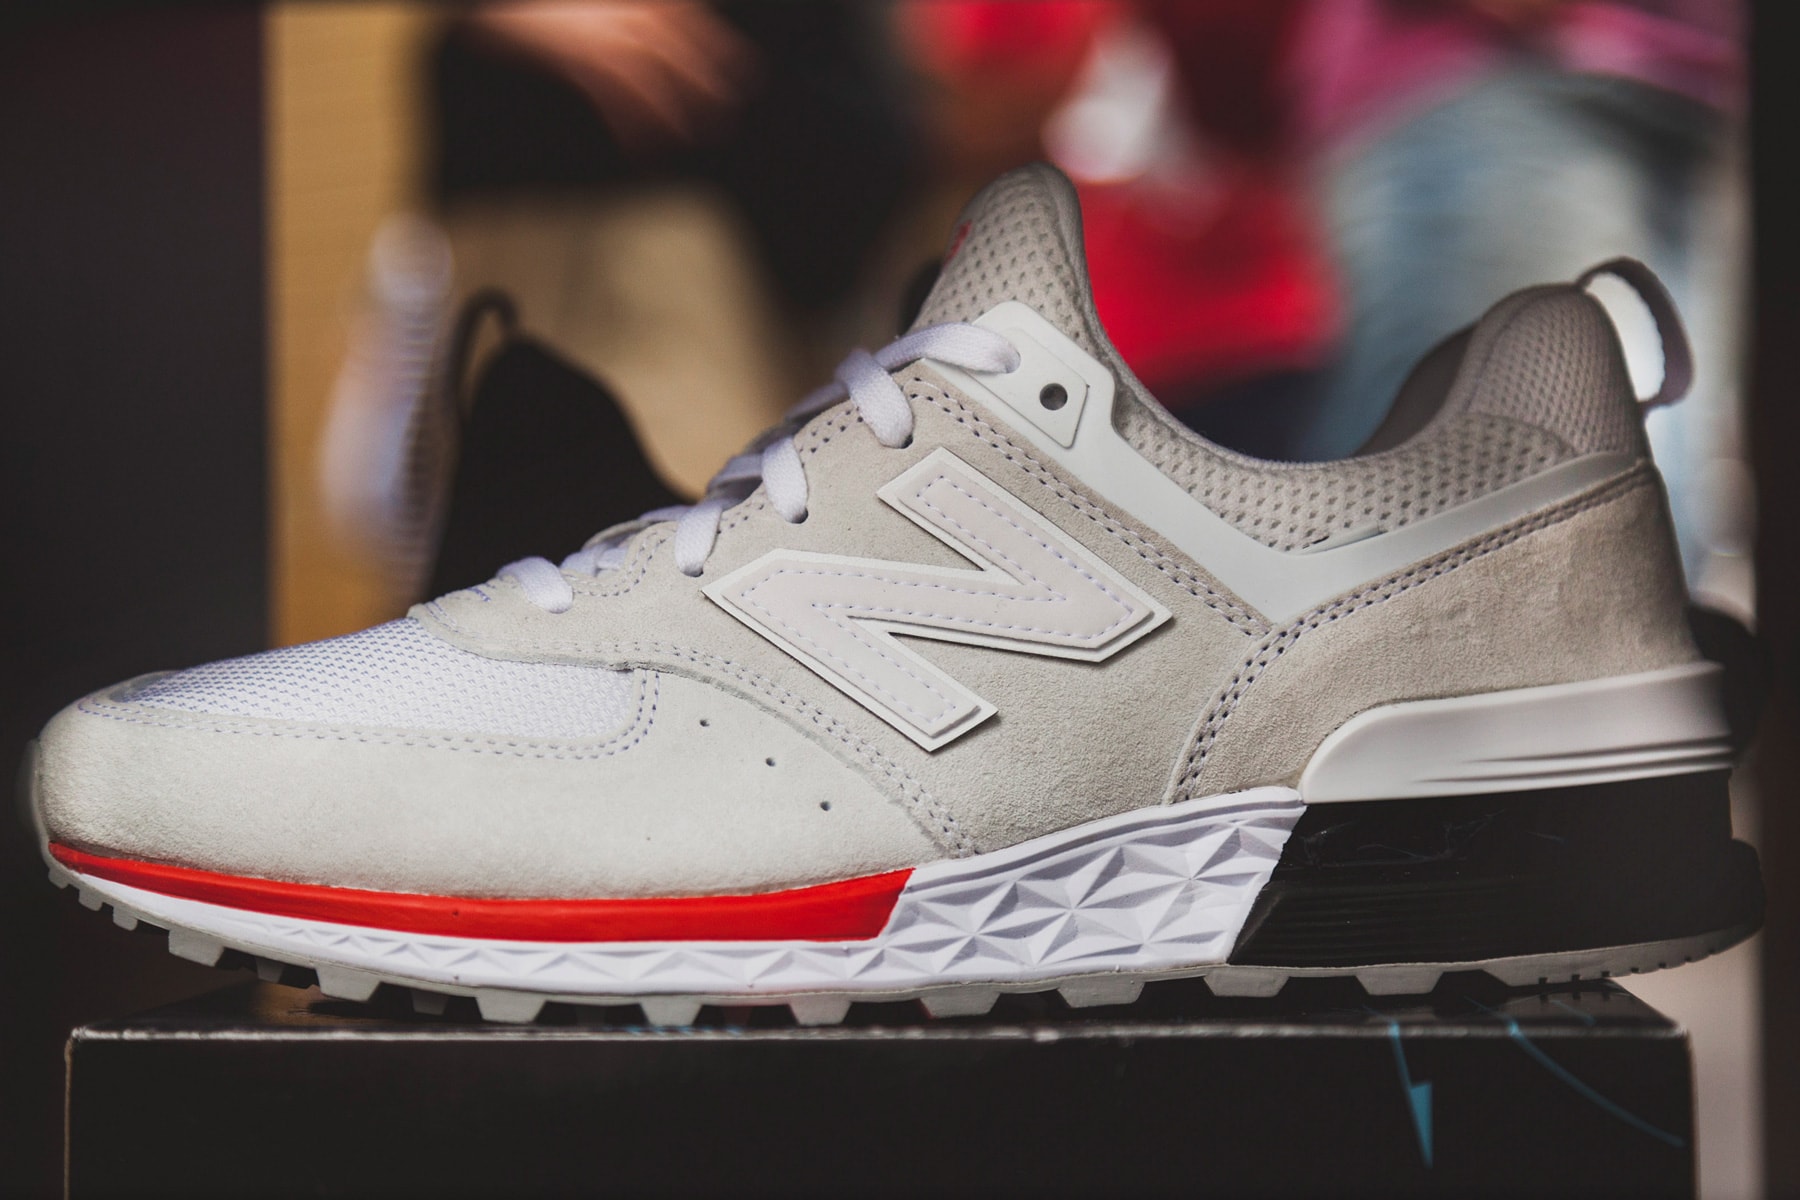 New Balance 574 Sport Model Footwear Sneakers Shoes Lifestyle Runner coffee carts nyc new york city